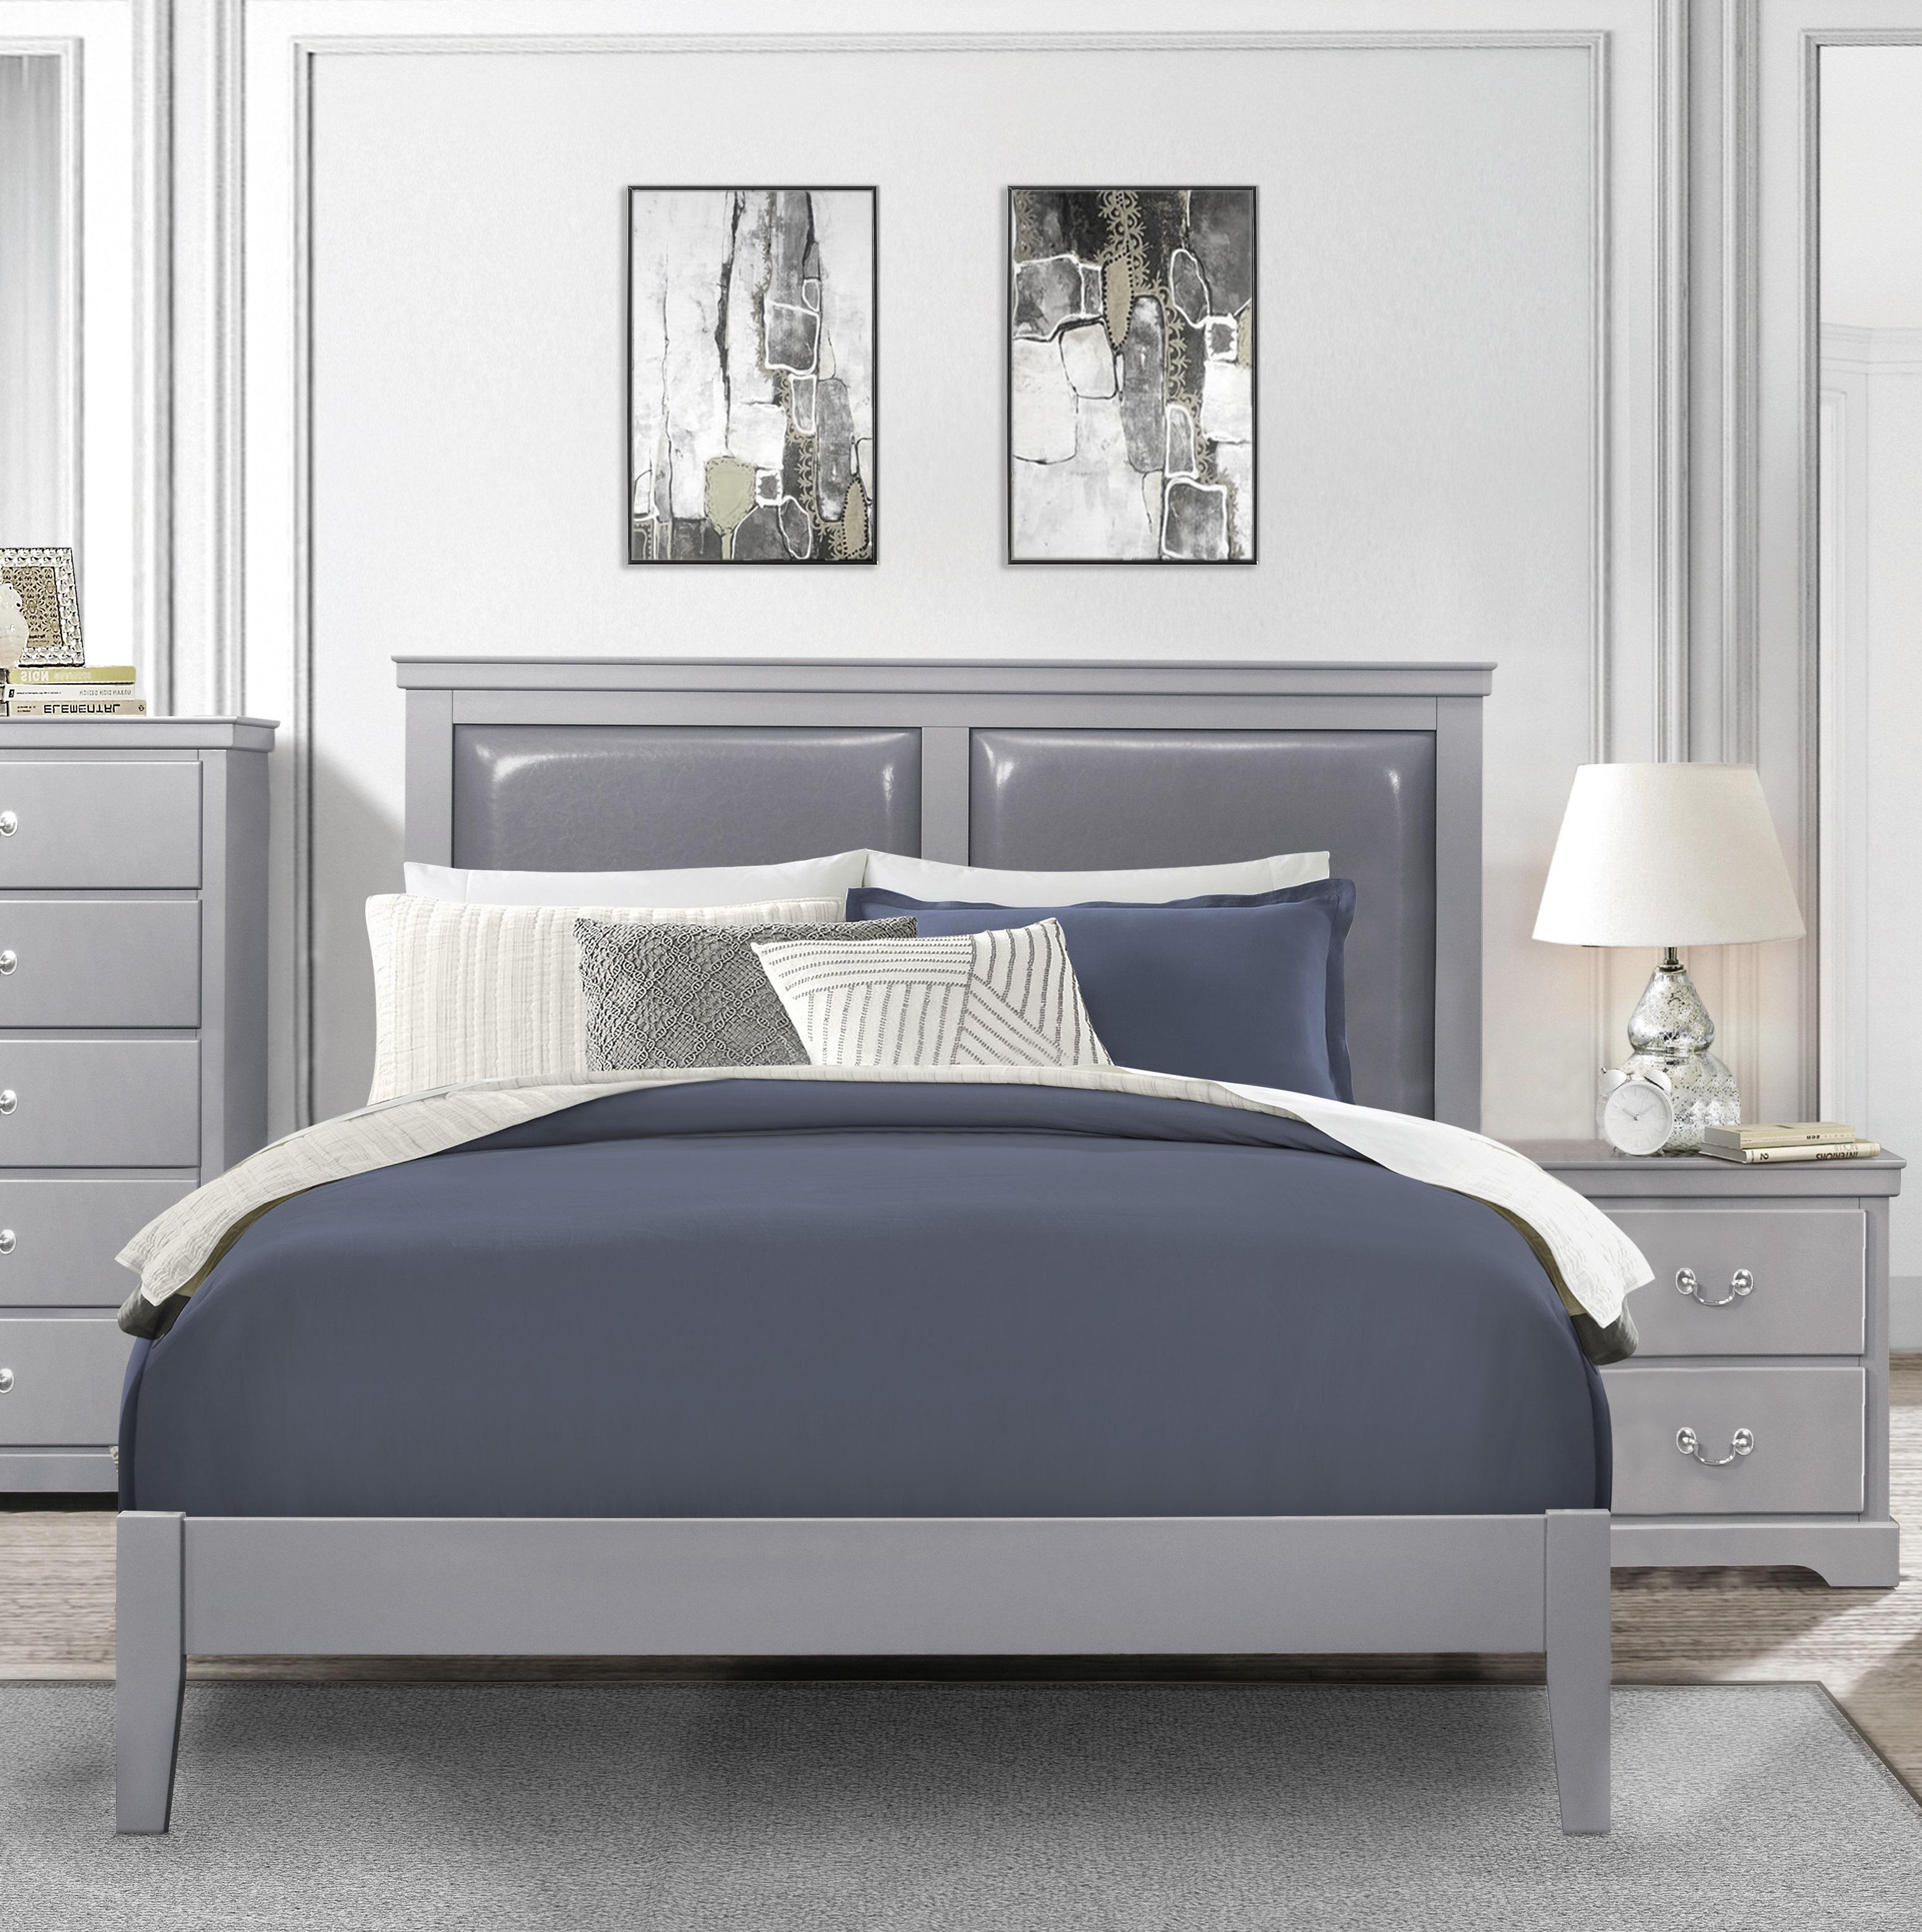 Modern Bedroom Set 1519GYF-1-3PC Seabright 1519GYF-1-3PC in Gray Faux Leather